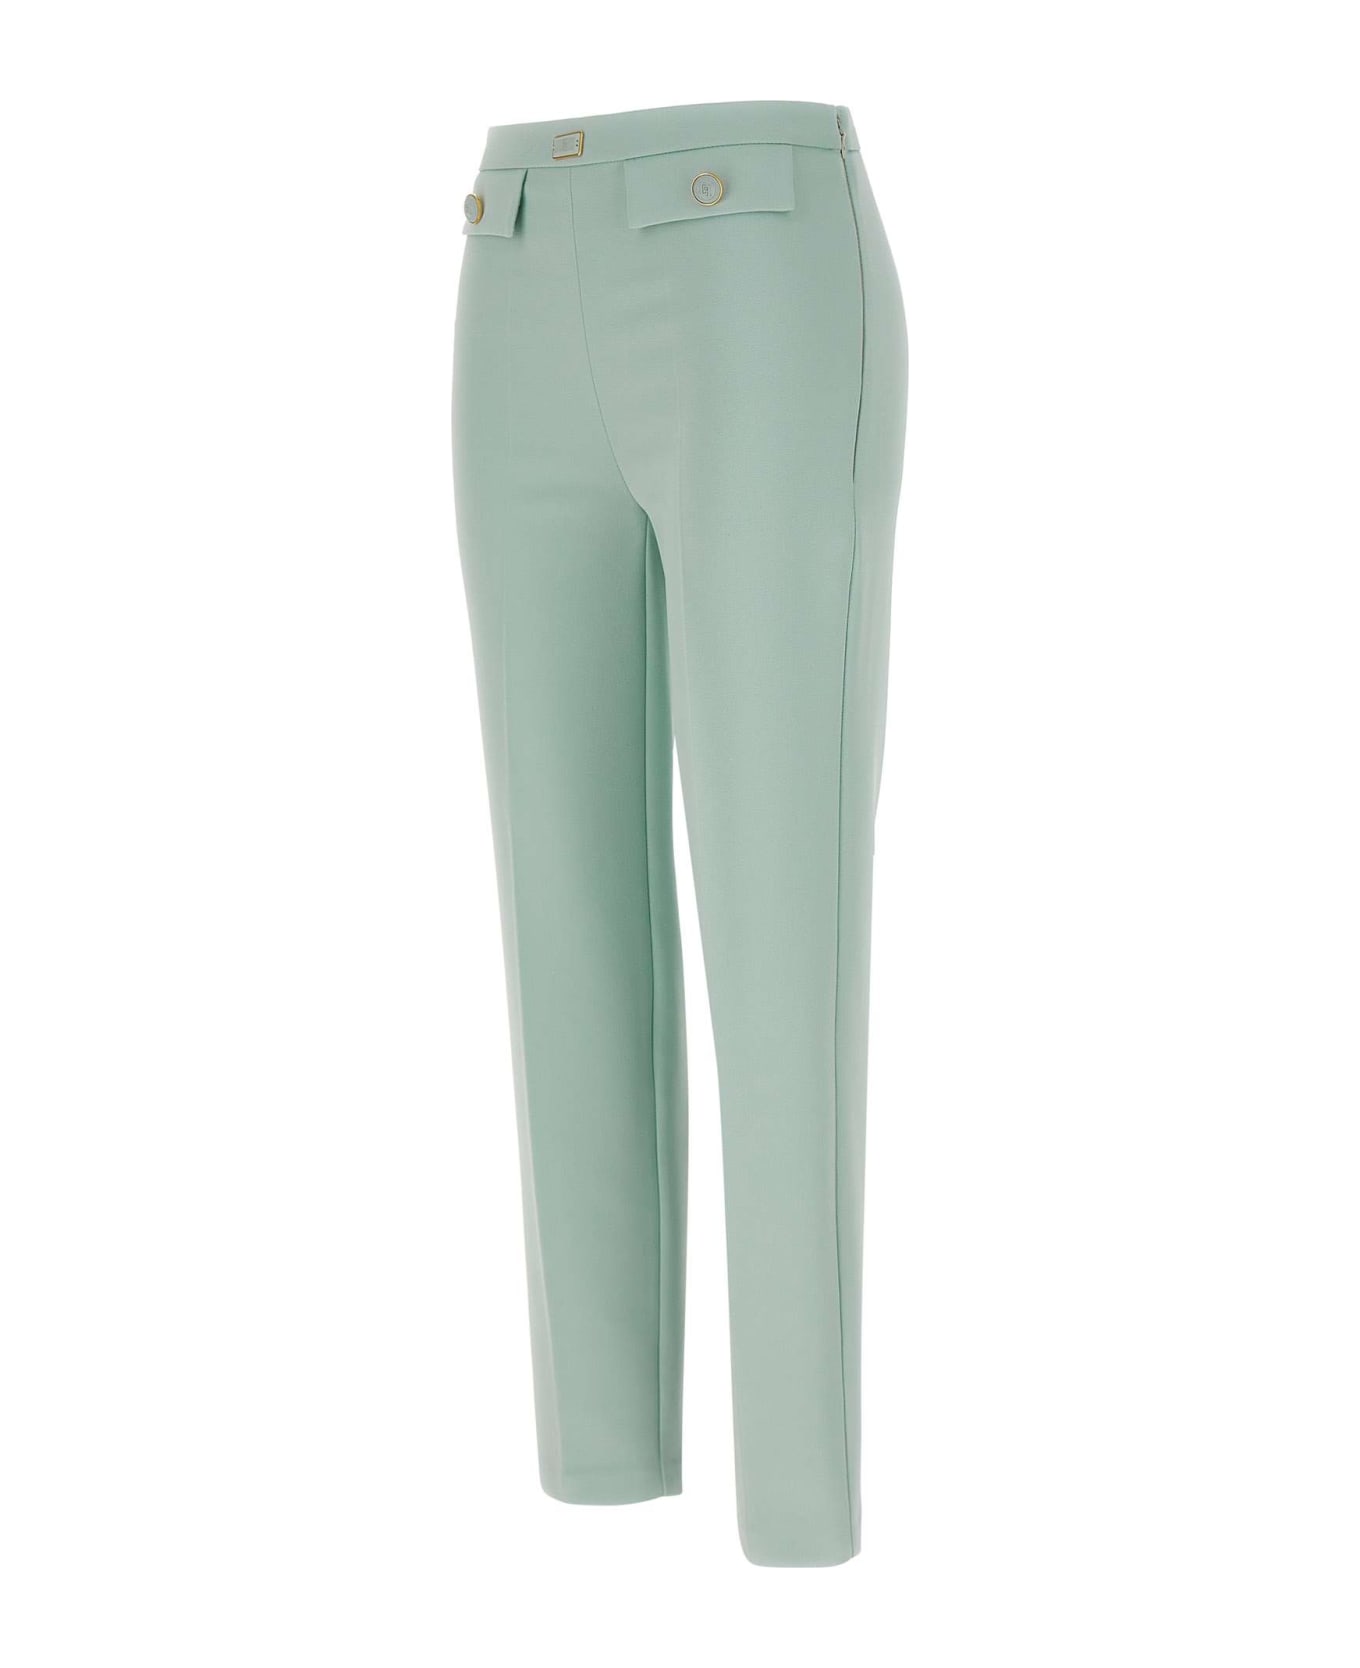 Elisabetta Franchi 'daily' Trousers - GREEN ボトムス